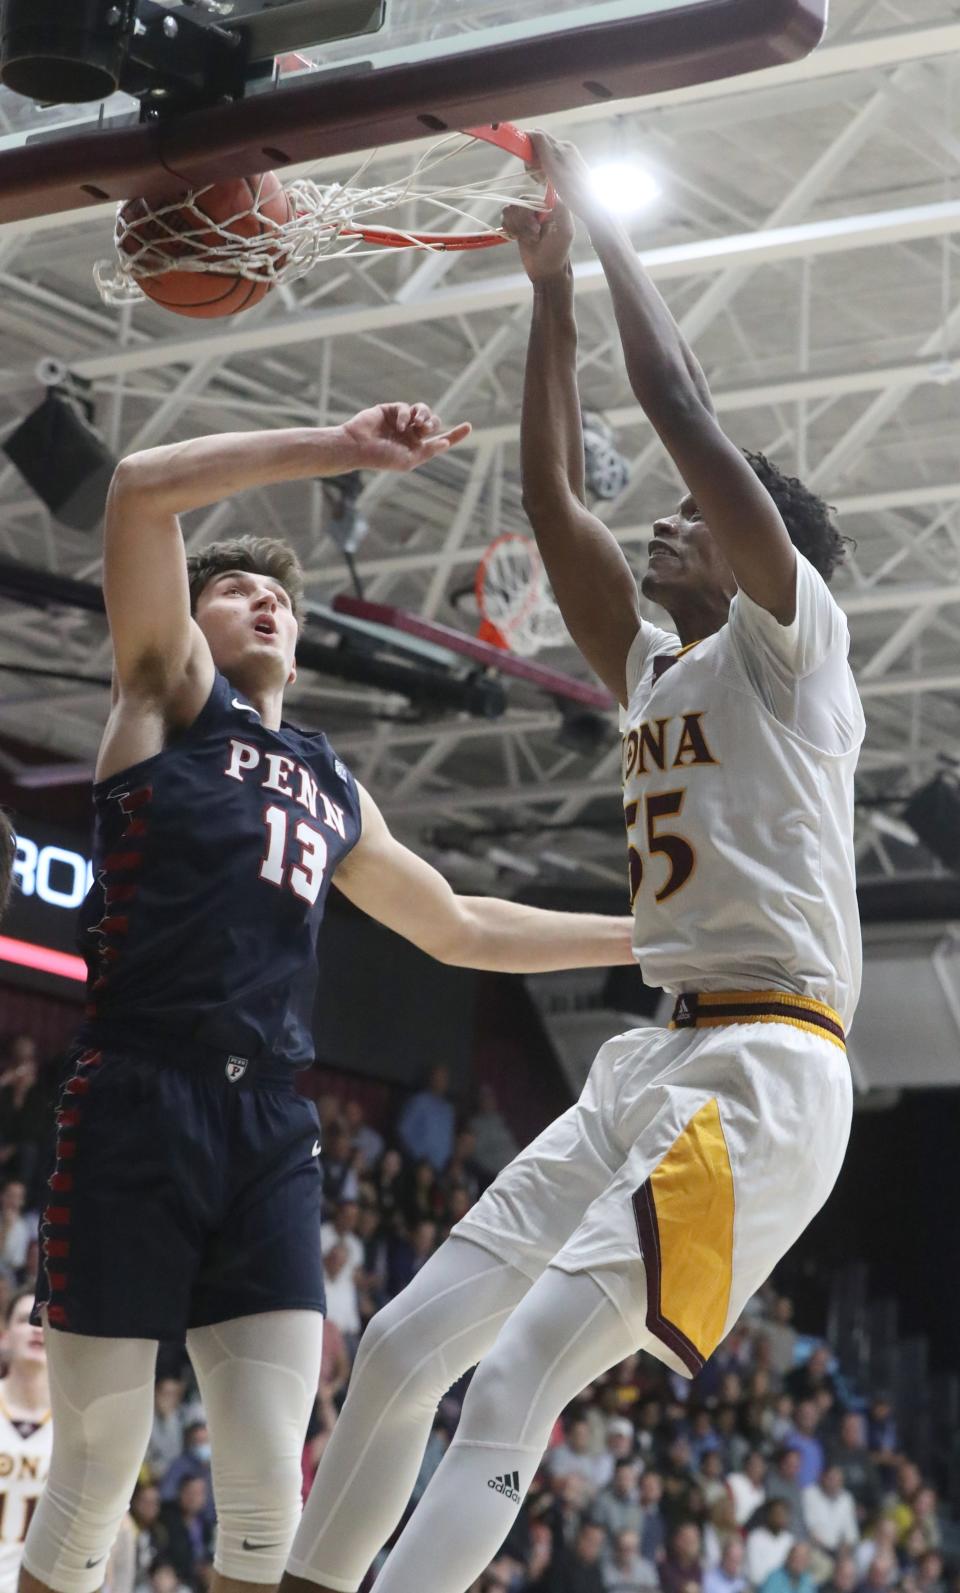 Iona's Osborn Shema competes against Penn's Nick Spinoso during a game at Iona Nov. 7, 2022.